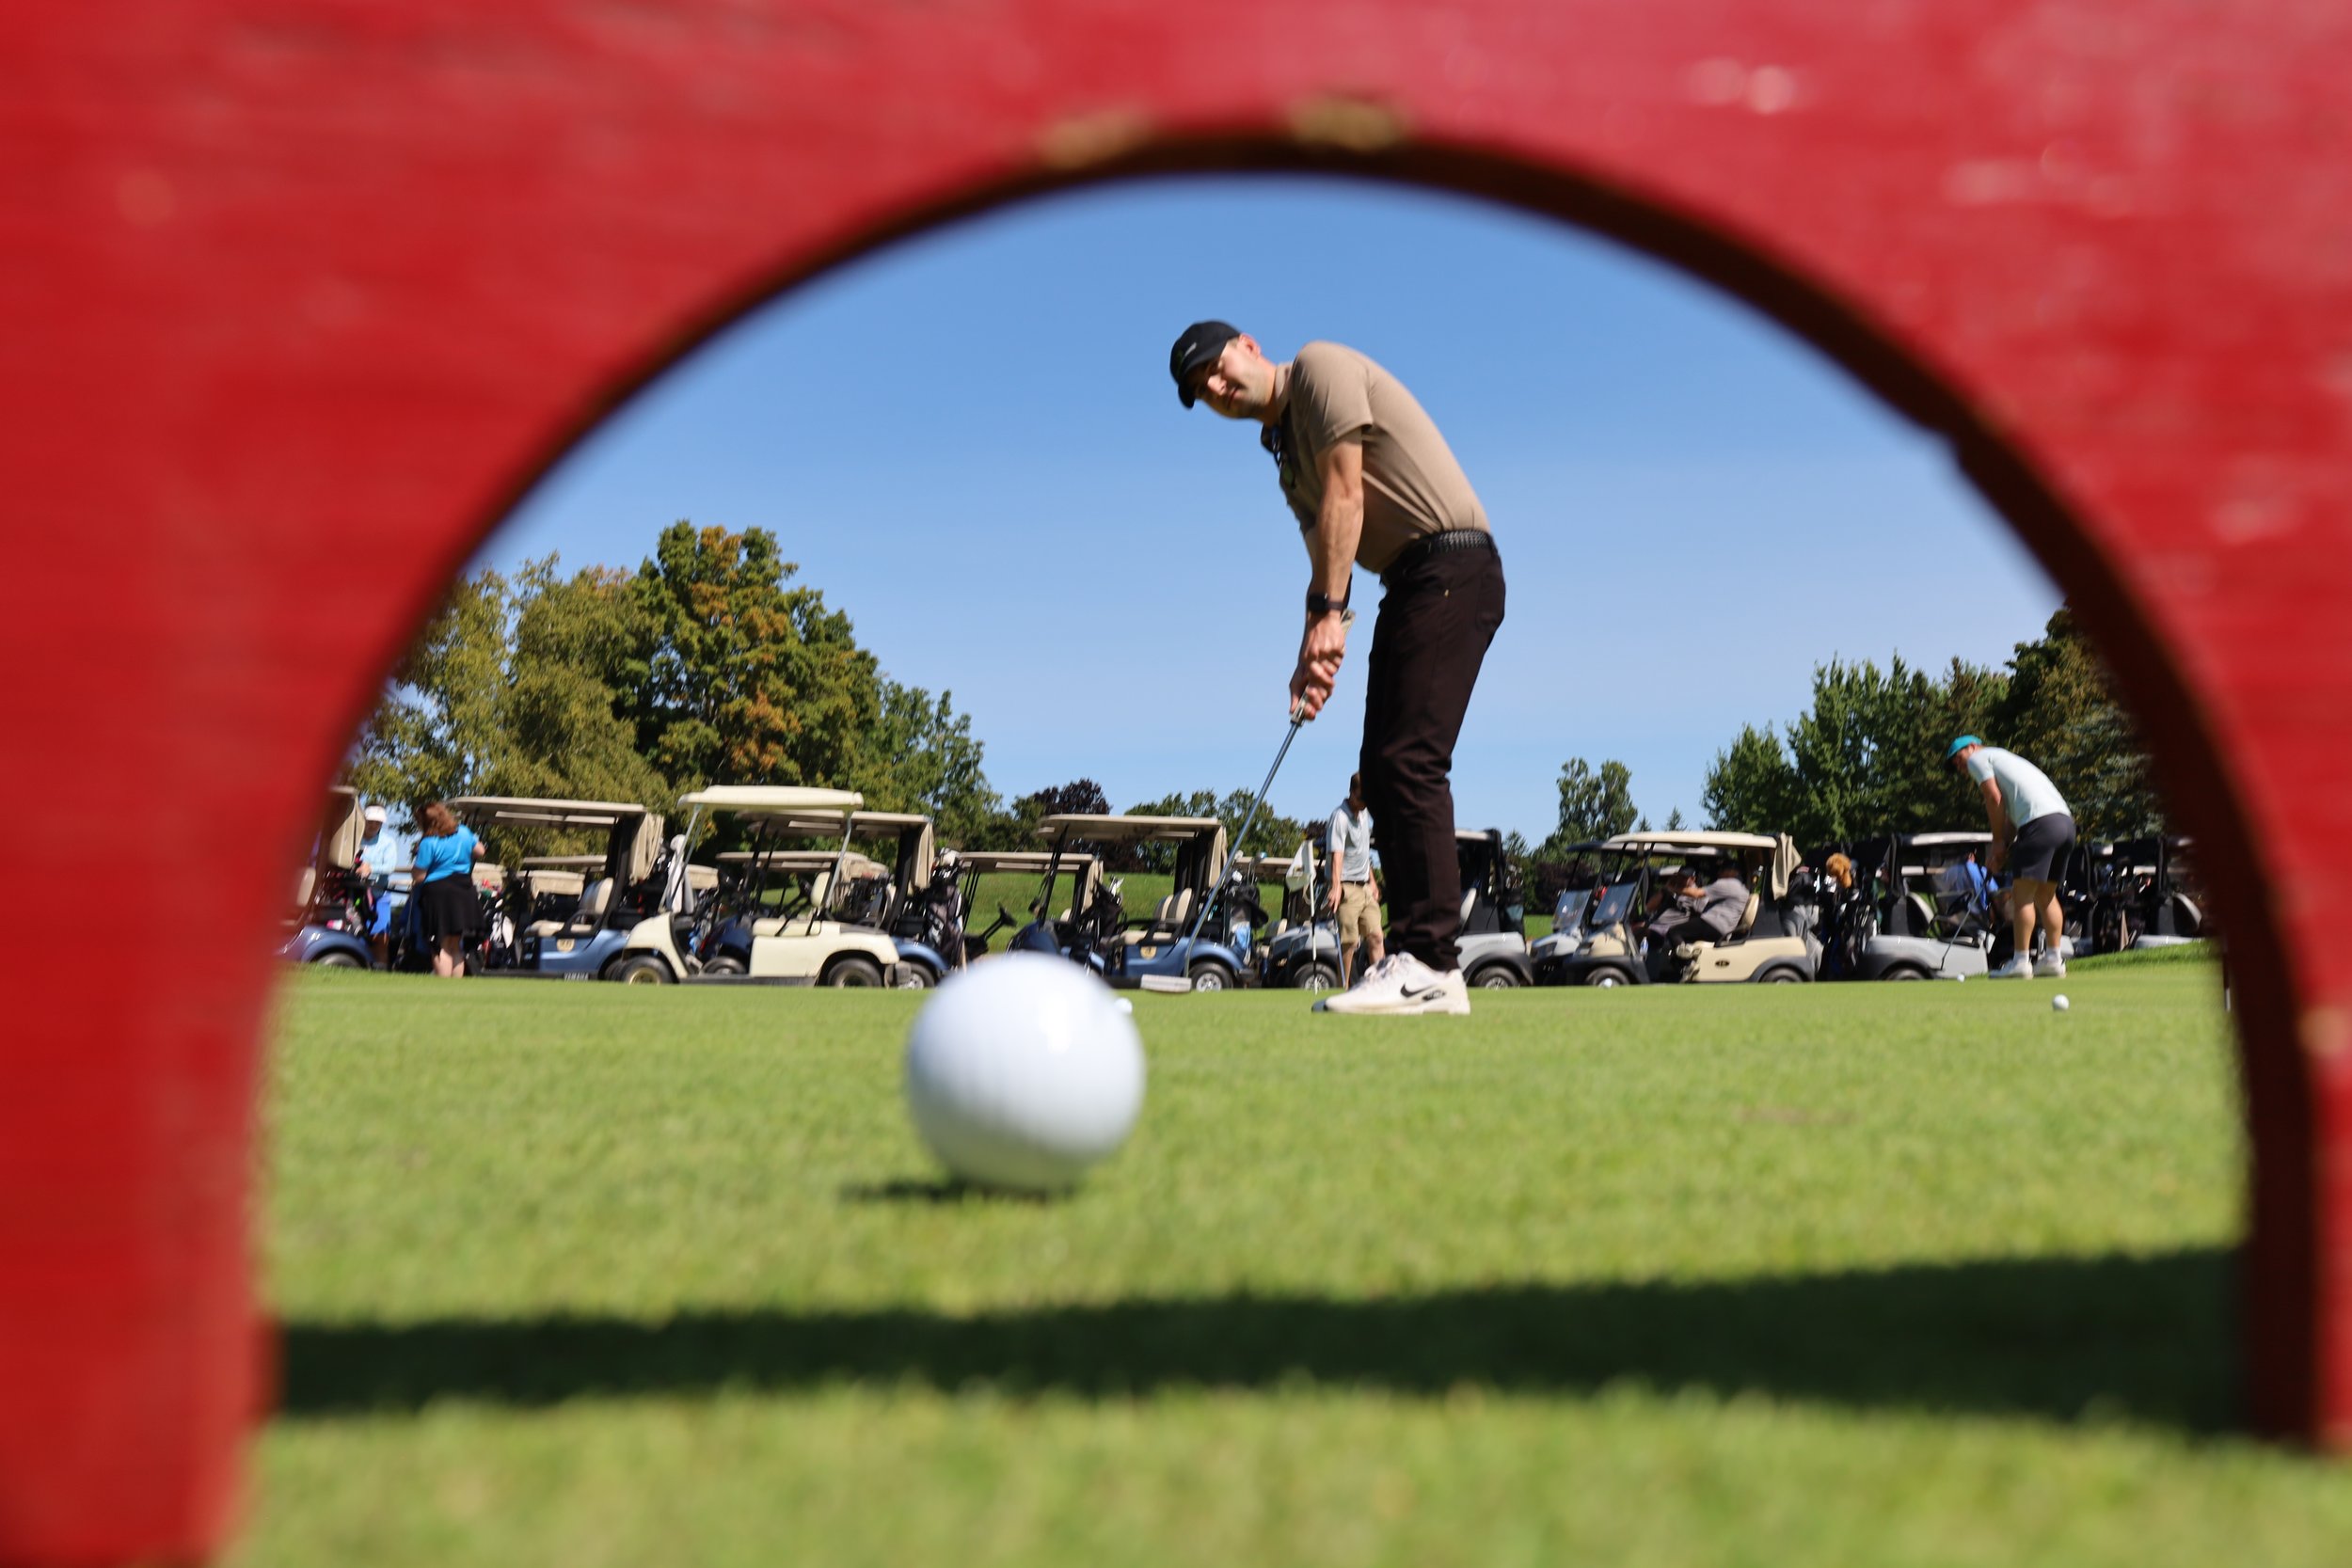 Mitch Ahrens of Darling Insurance playing the putting game as he practices for the tournament in support of Food For Kids. All photos by David Tuan Bui.